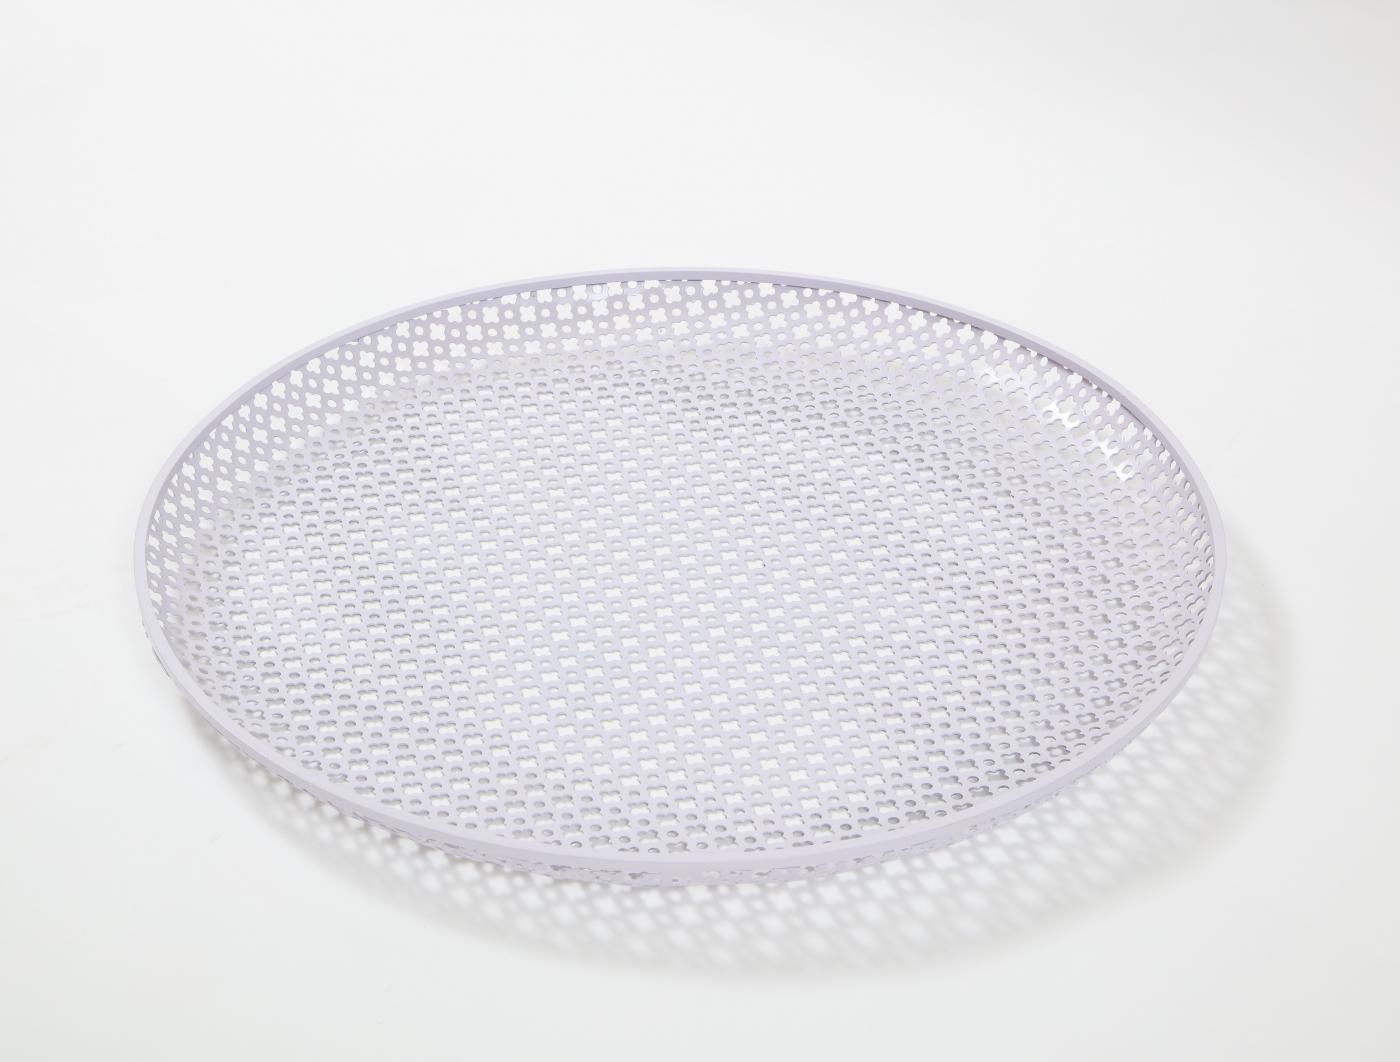 Modern White Round Perforated Metal Tray by Mathieu Mategot, France, c. 1950 For Sale